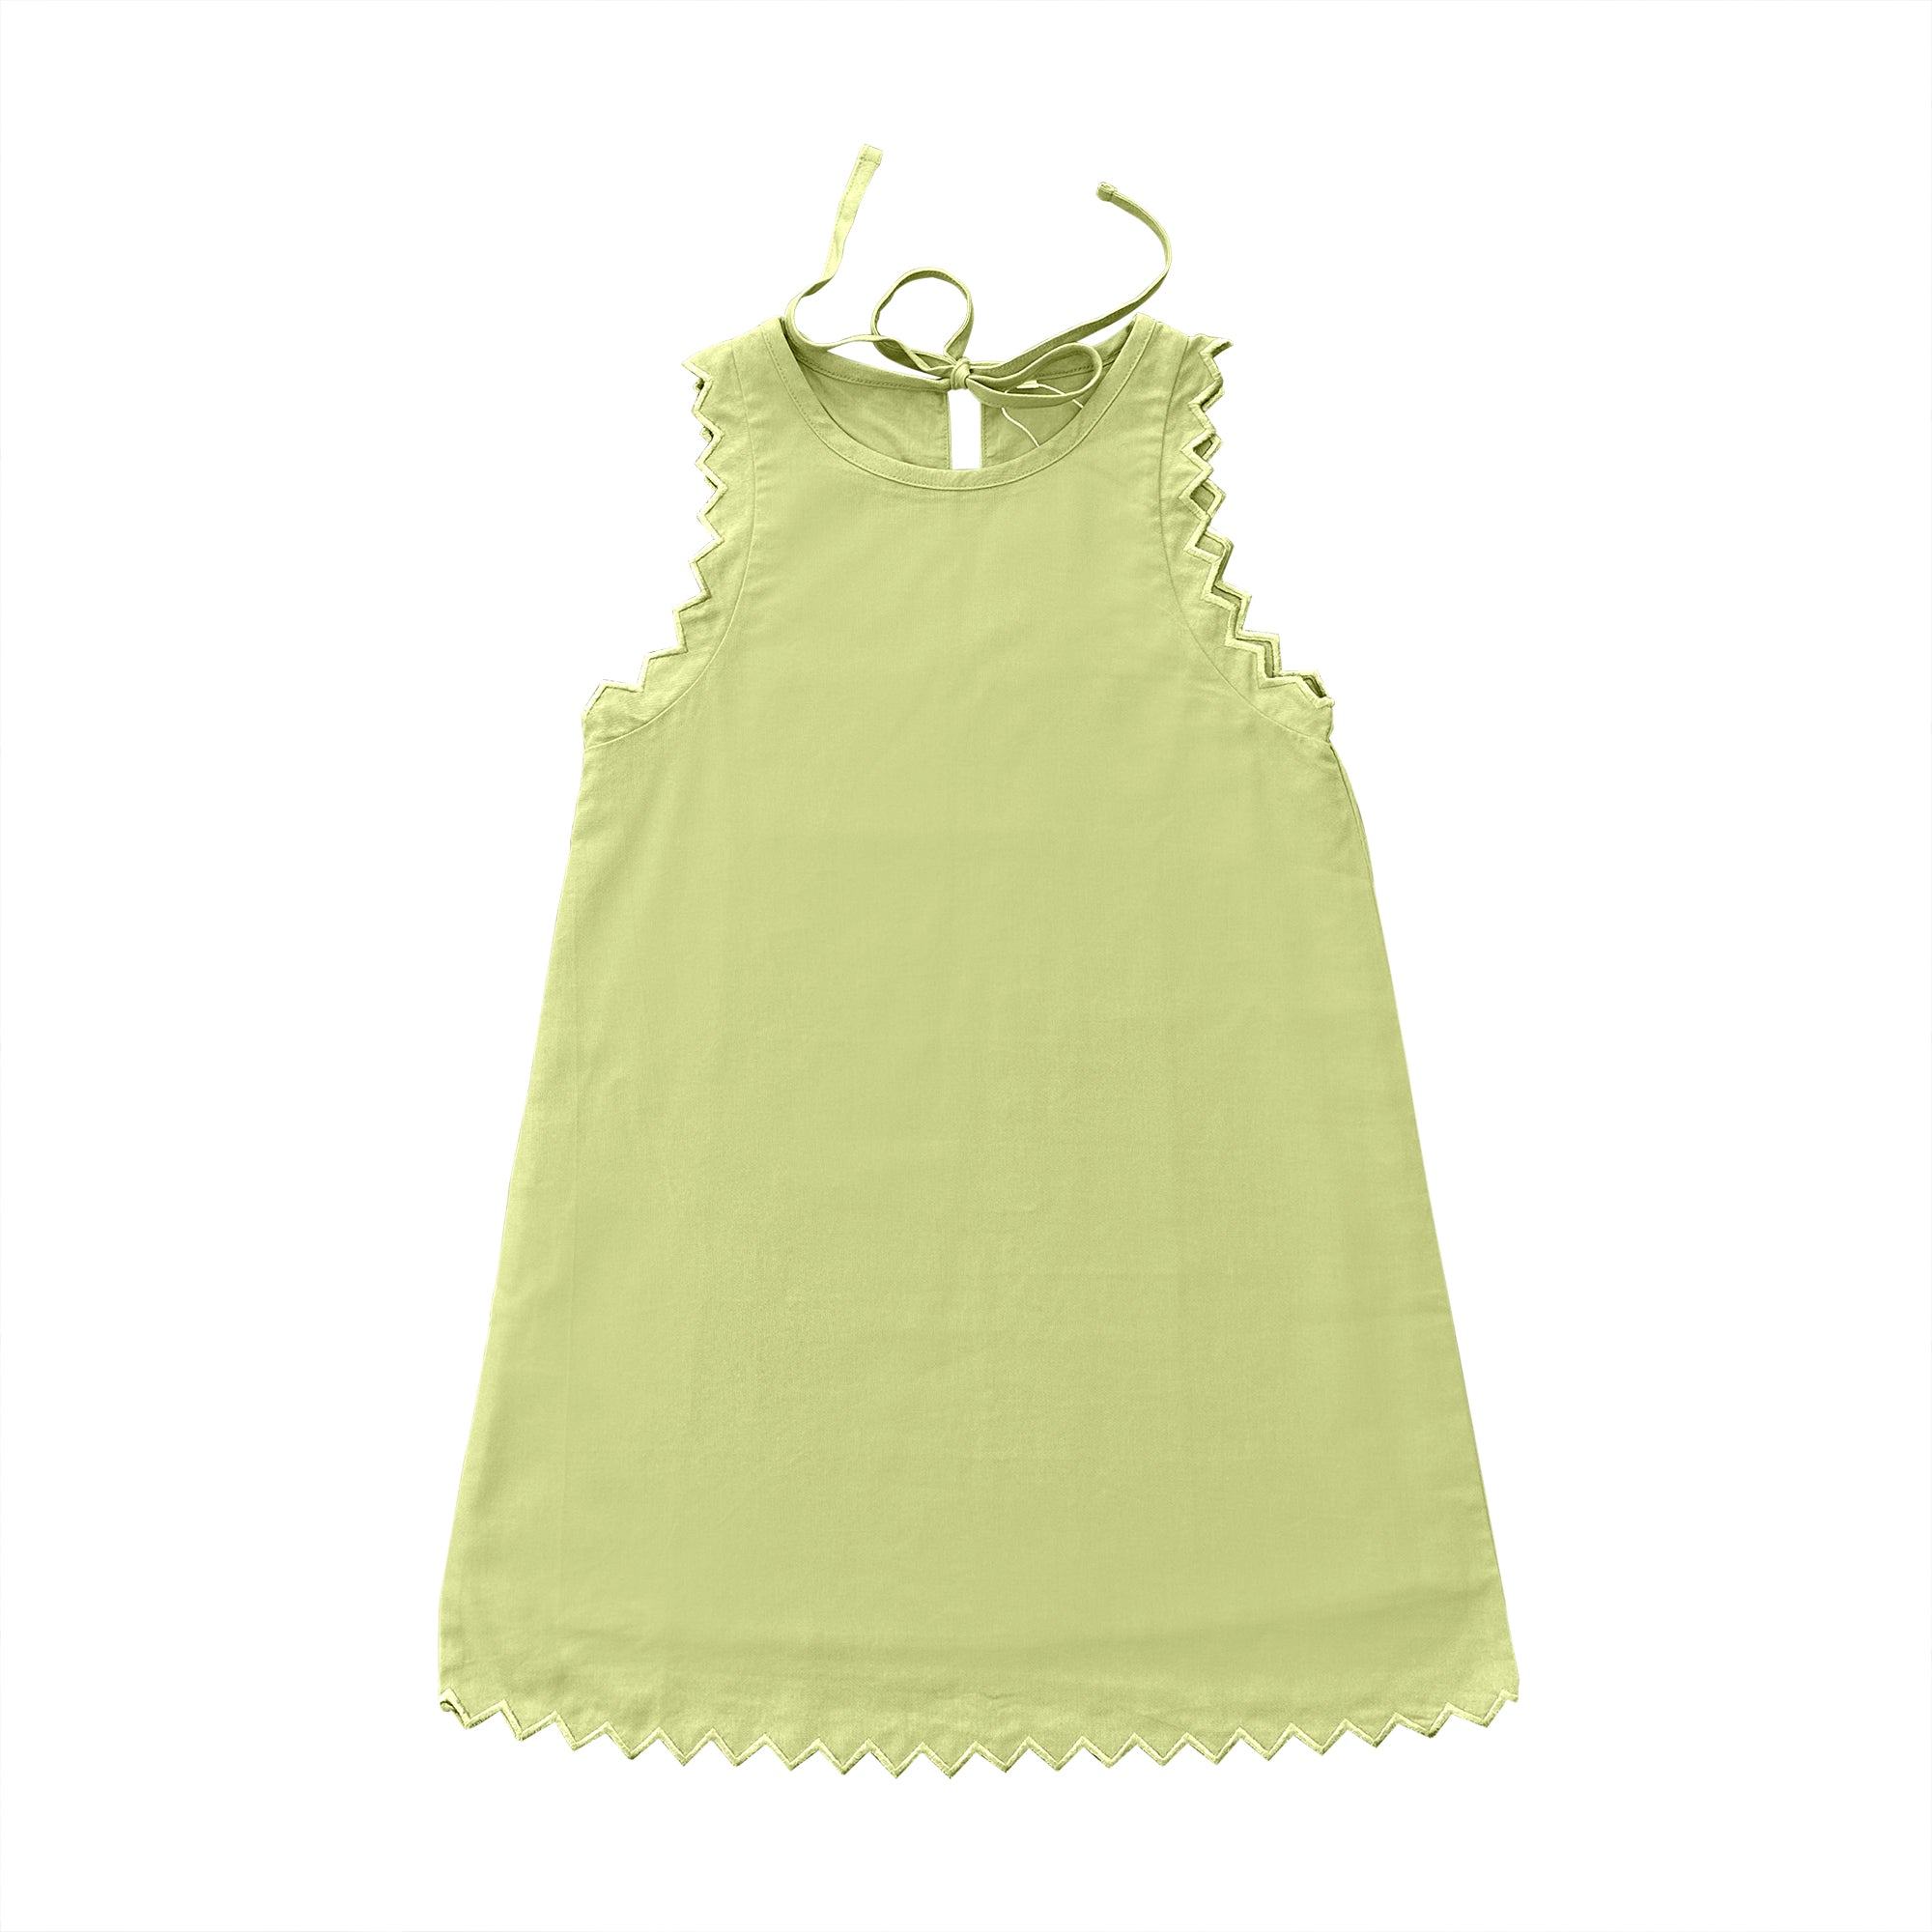 AS24 Yellow/Green Embroidered Dress